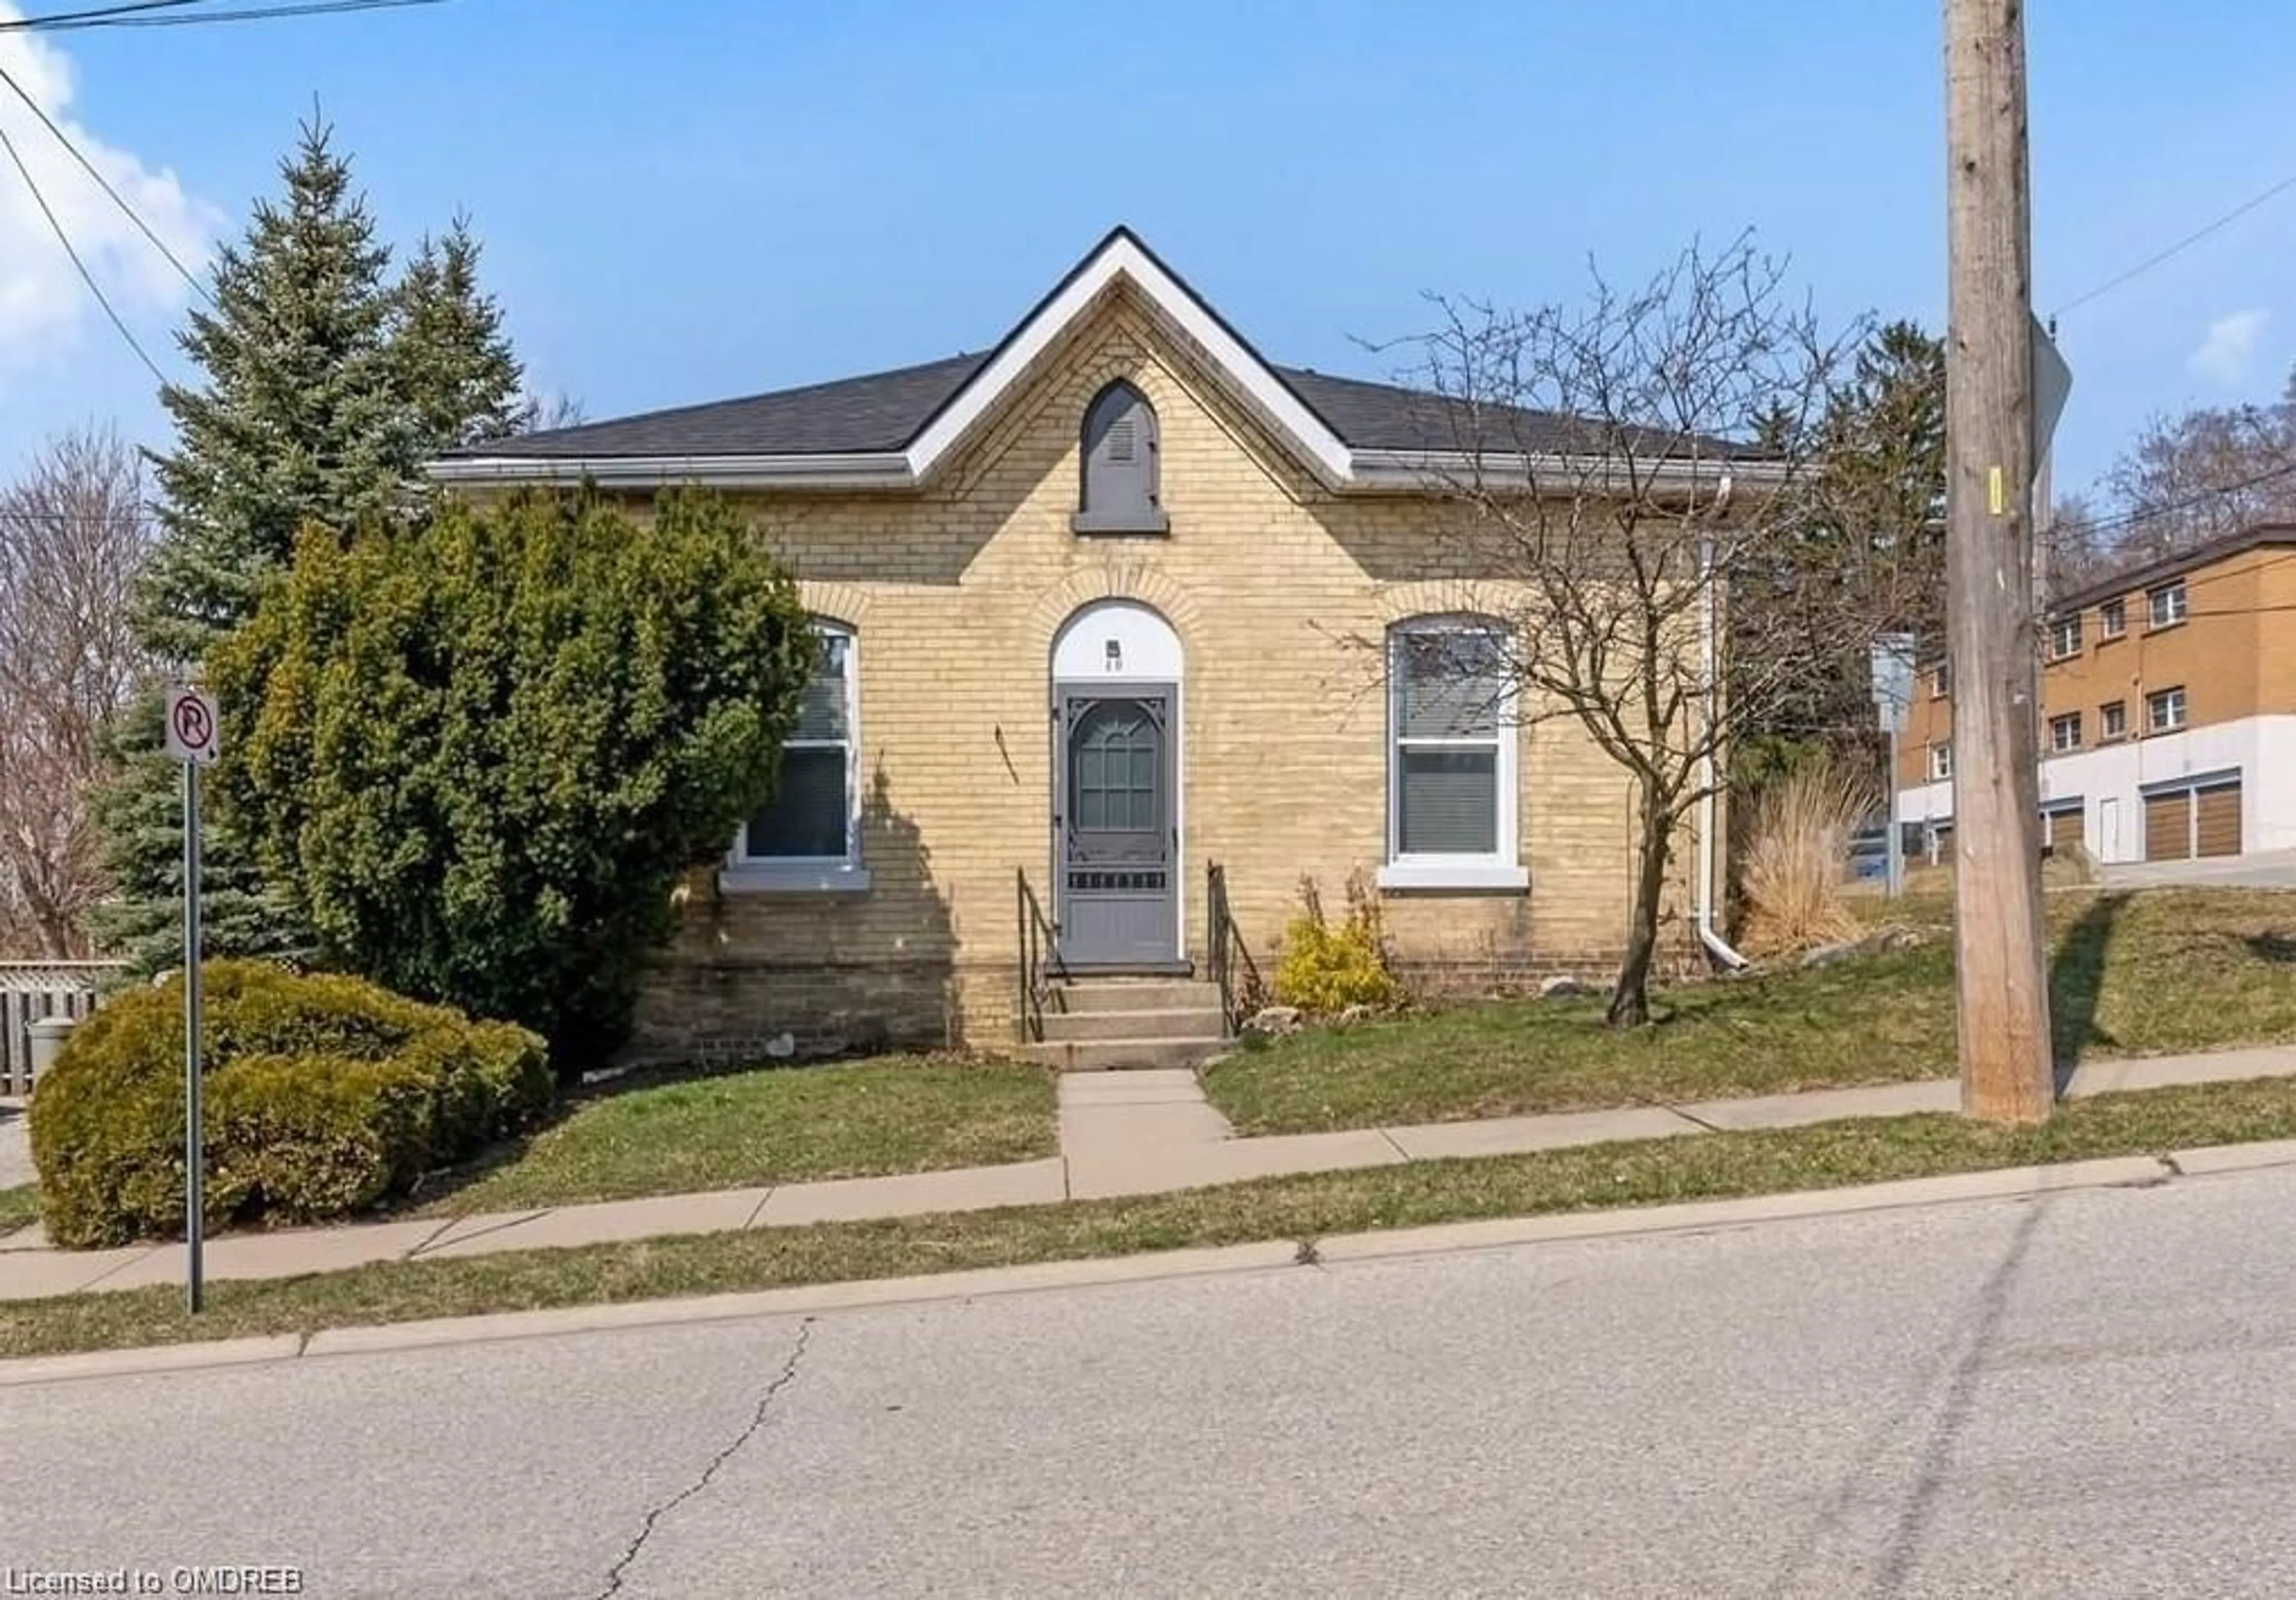 Frontside or backside of a home for 40 Niagara St, Brantford Ontario N3R 4E2